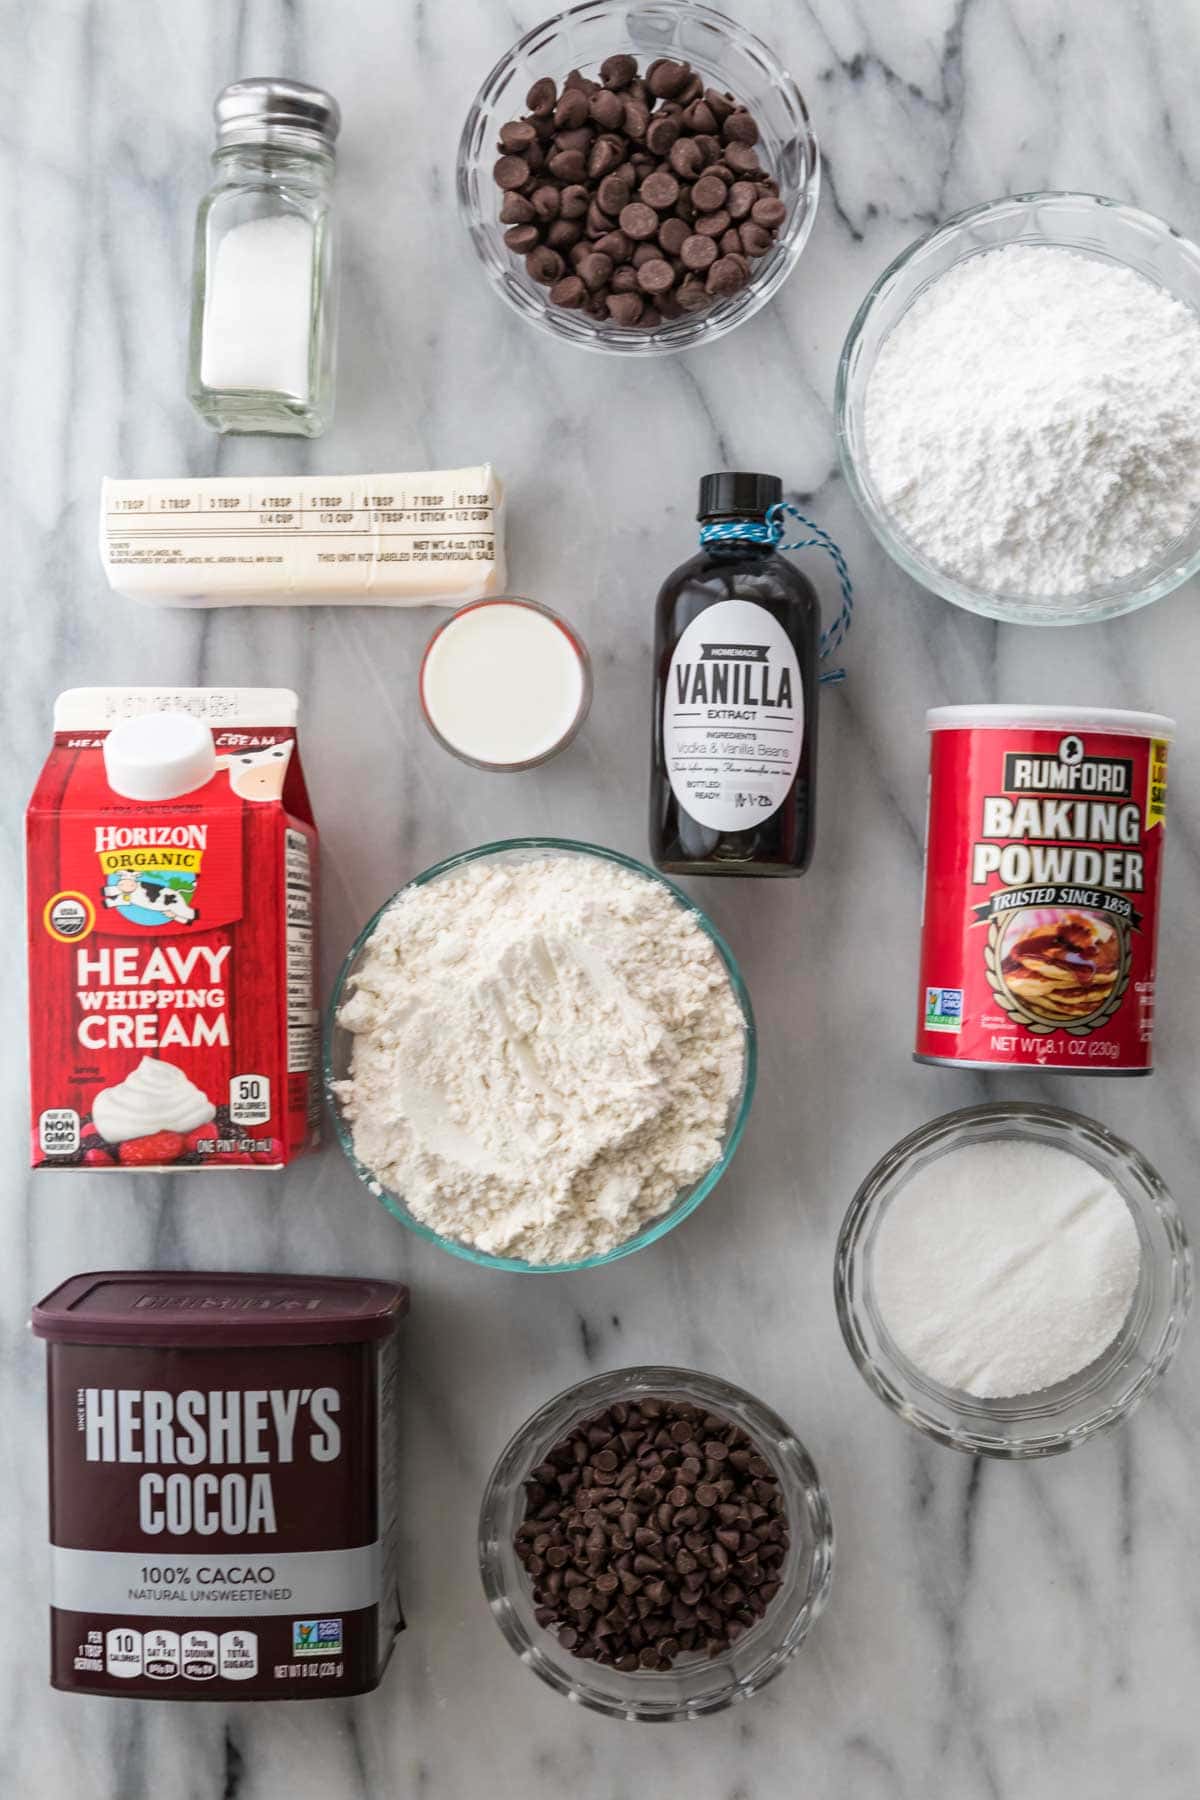 overhead view of ingredients including cream, flour, cocoa powder, chocolate chips, and more